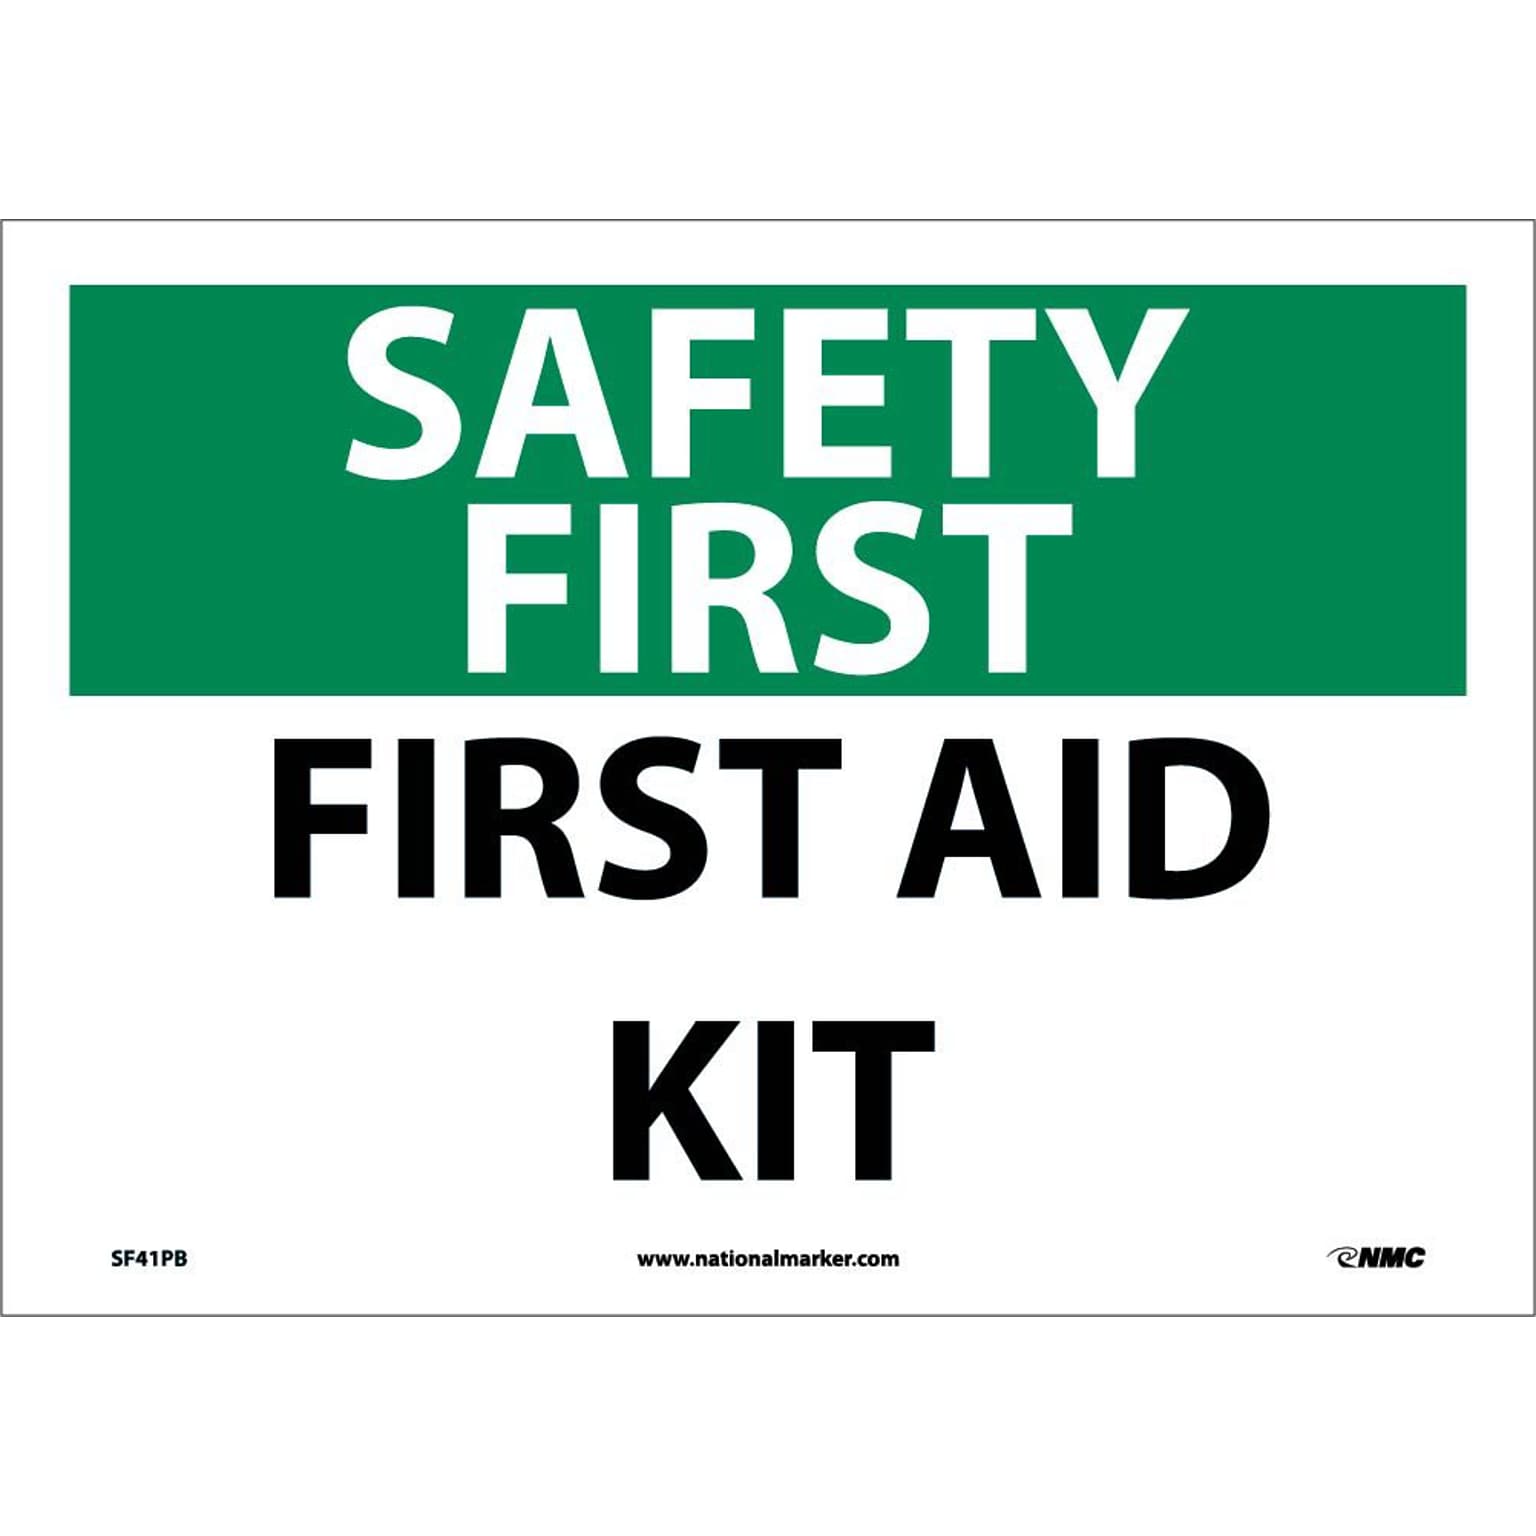 Safety First Information Labels; First Aid Kit, 10 x 14, Adhesive Vinyl